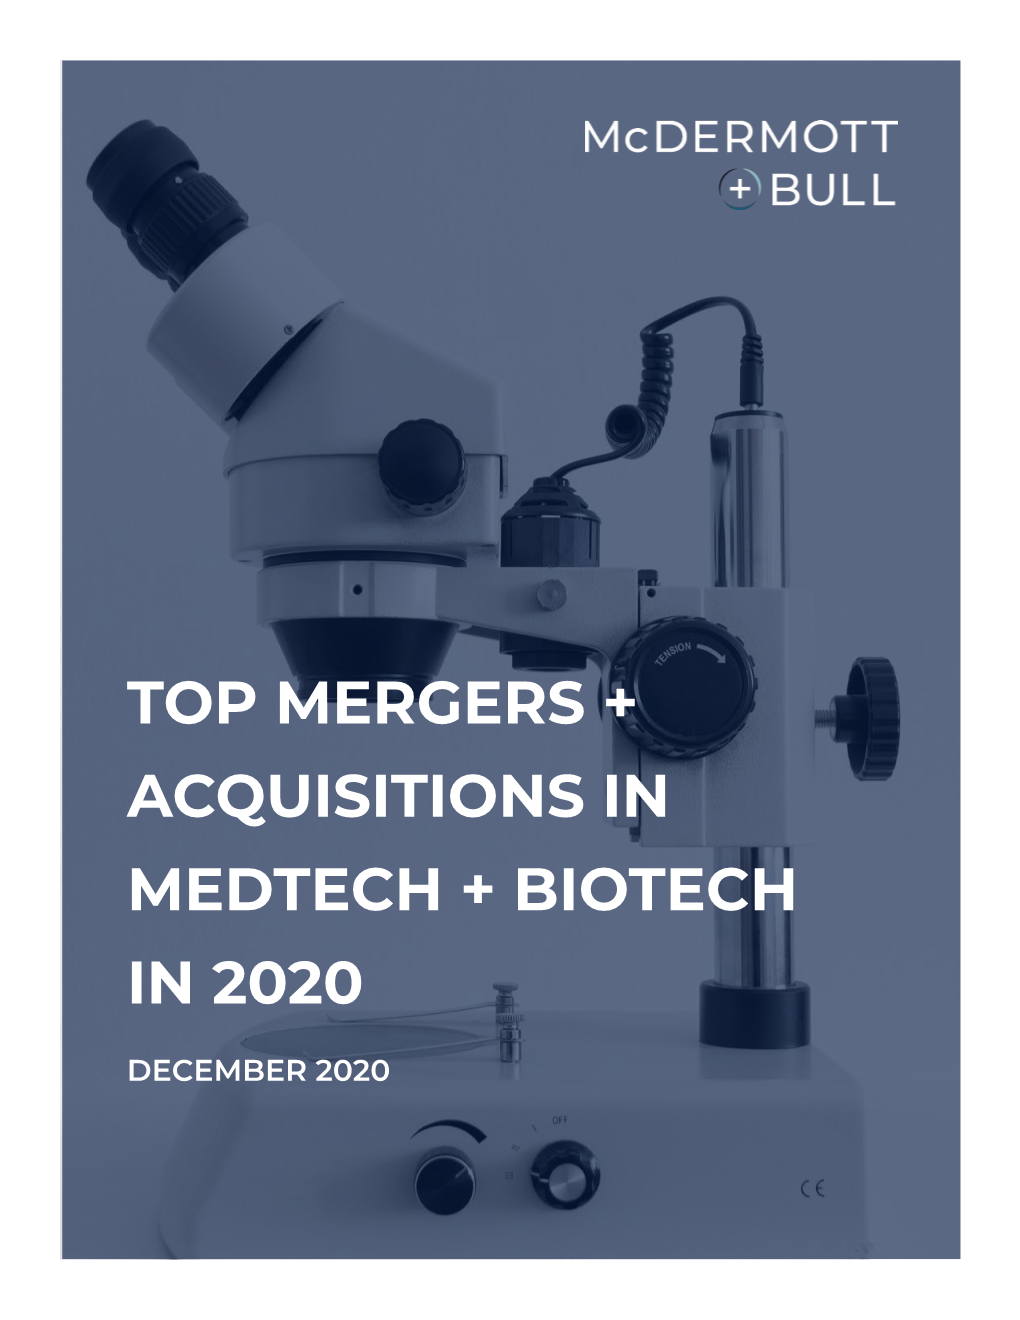 Top Mergers + Acquisitions in Medtech + Biotech in 2020